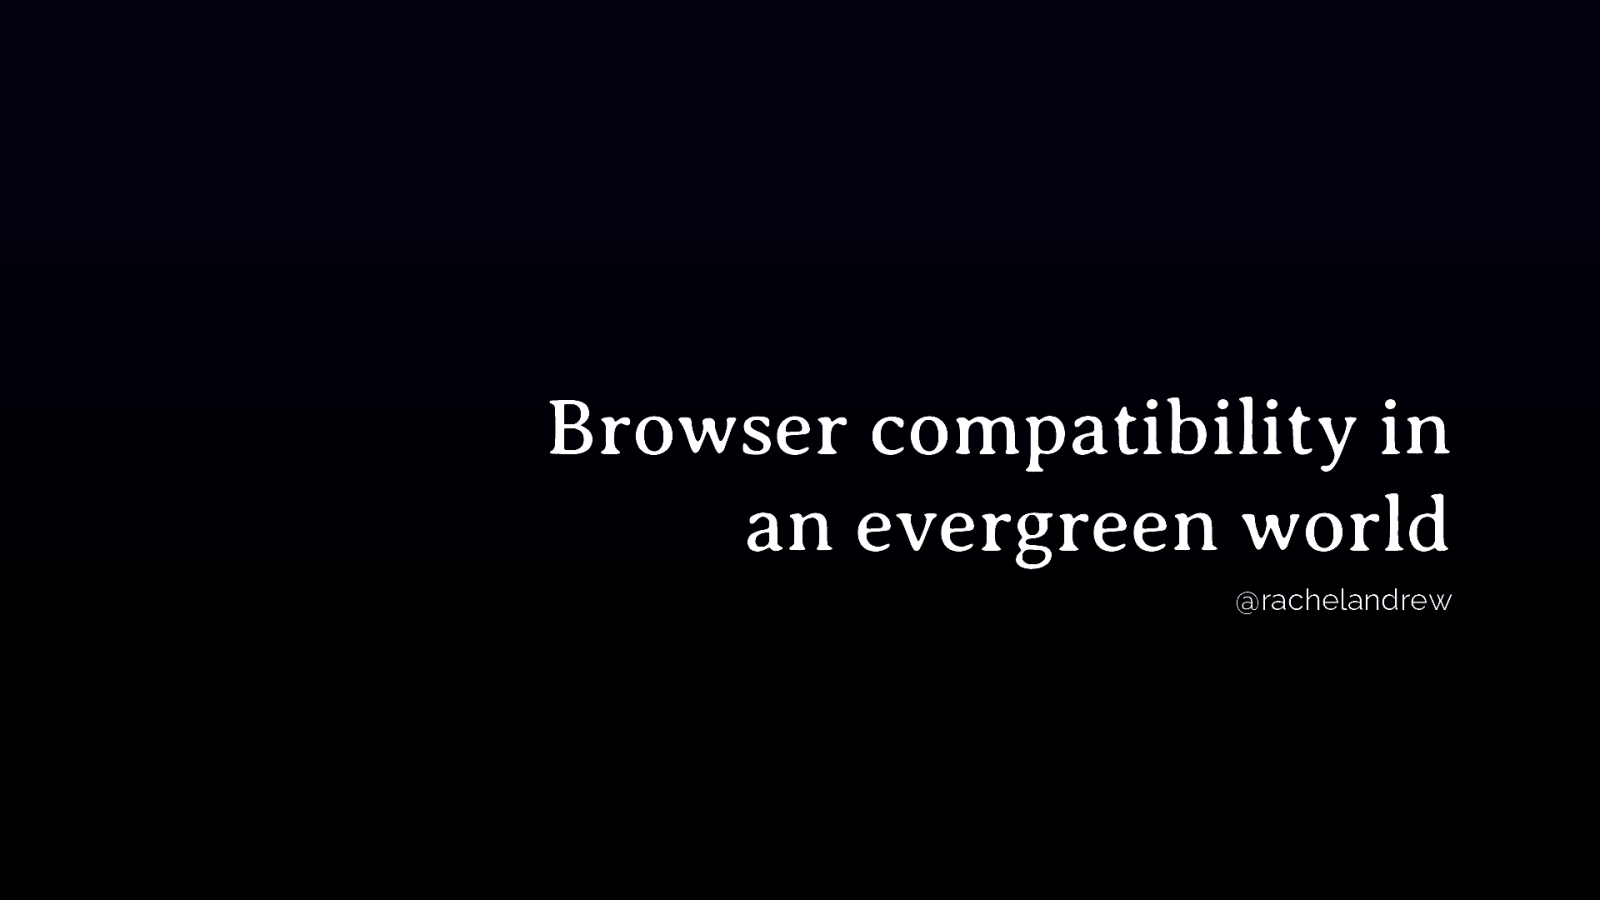 Browser compatibility in an evergreen world